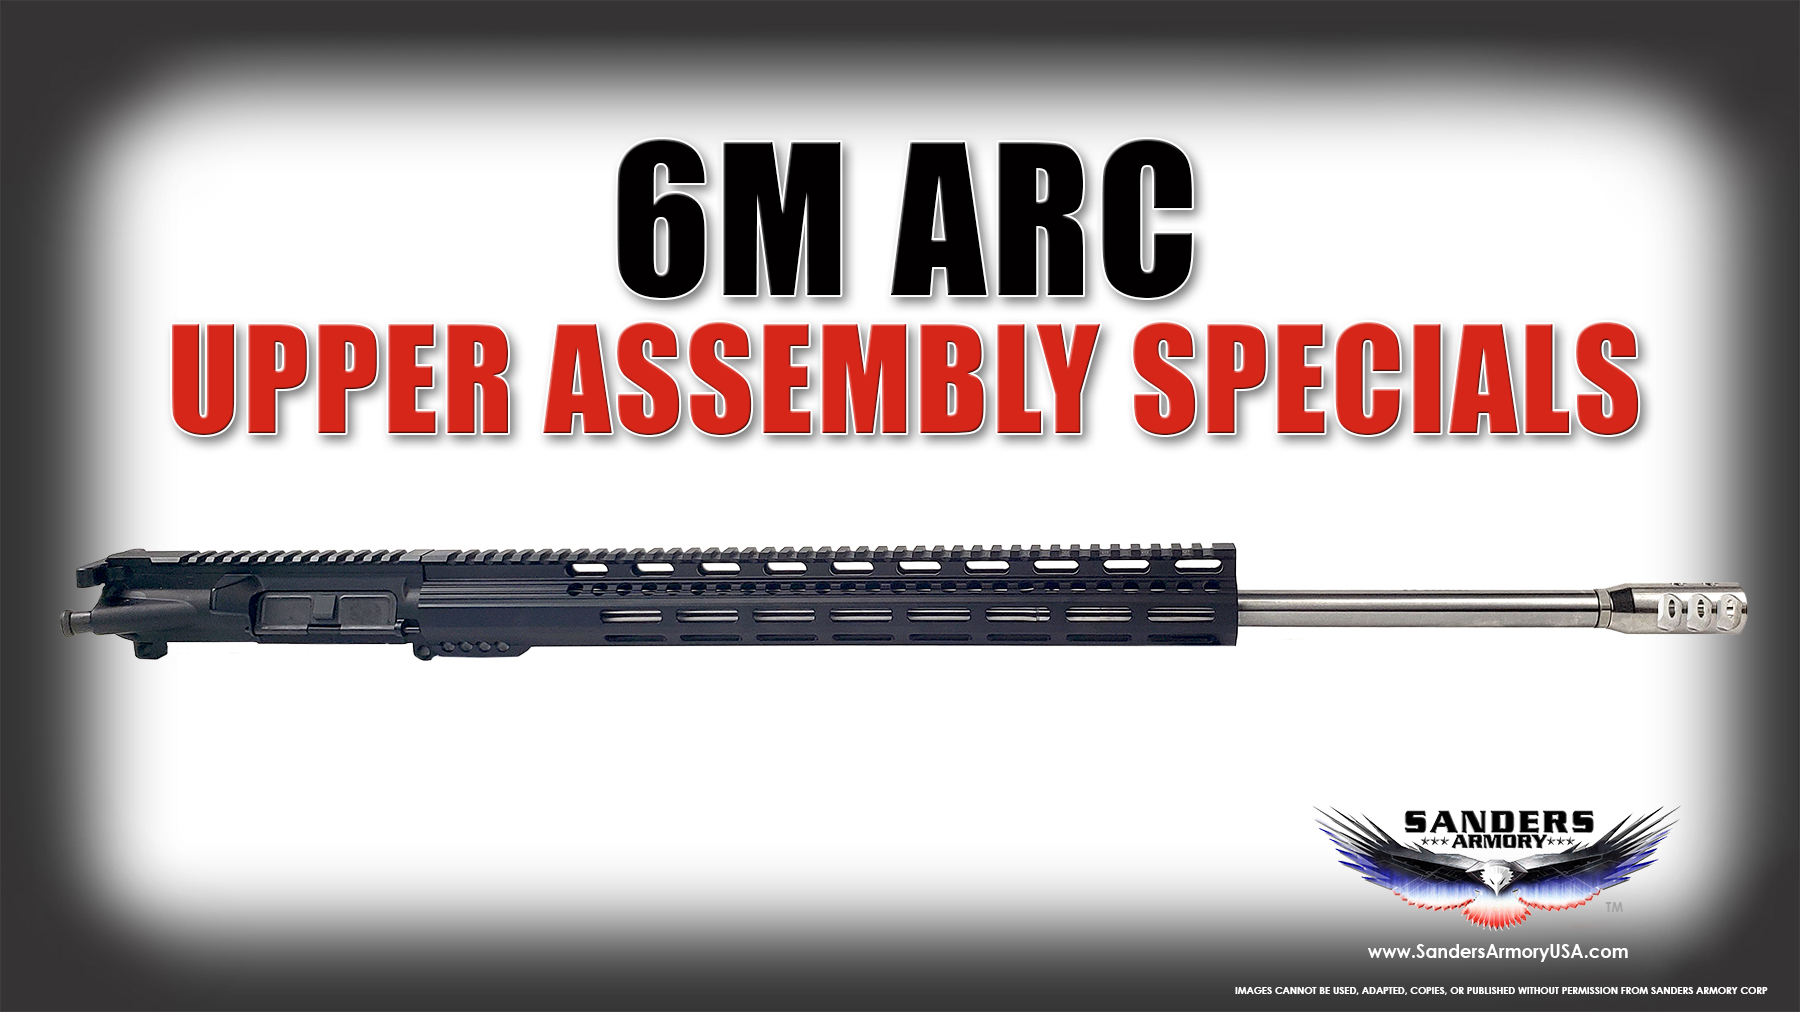 Sanders Armory 6MM ARC Specials